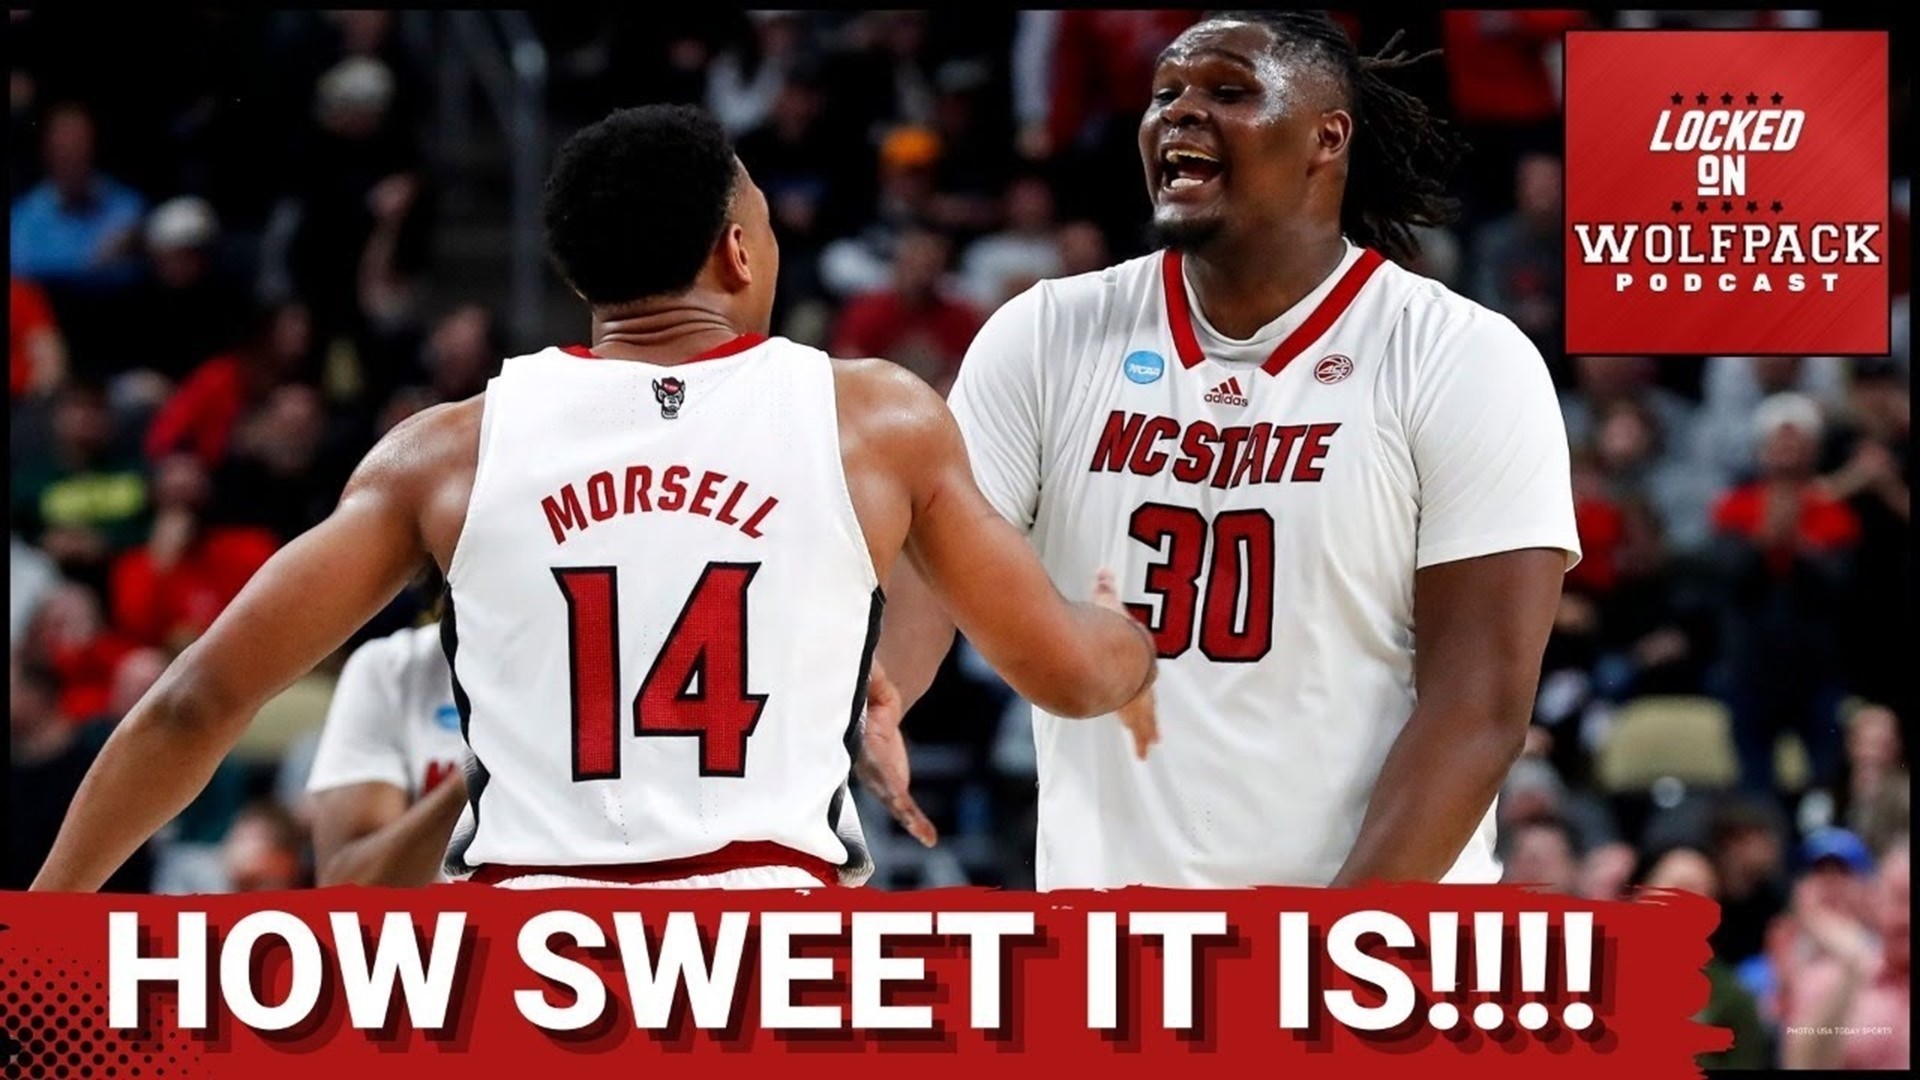 For the first time in 9 Years, YOUR NC State Wolfpack are dancing into the Sweet 16. What a team. What a run. What a time to be alive.